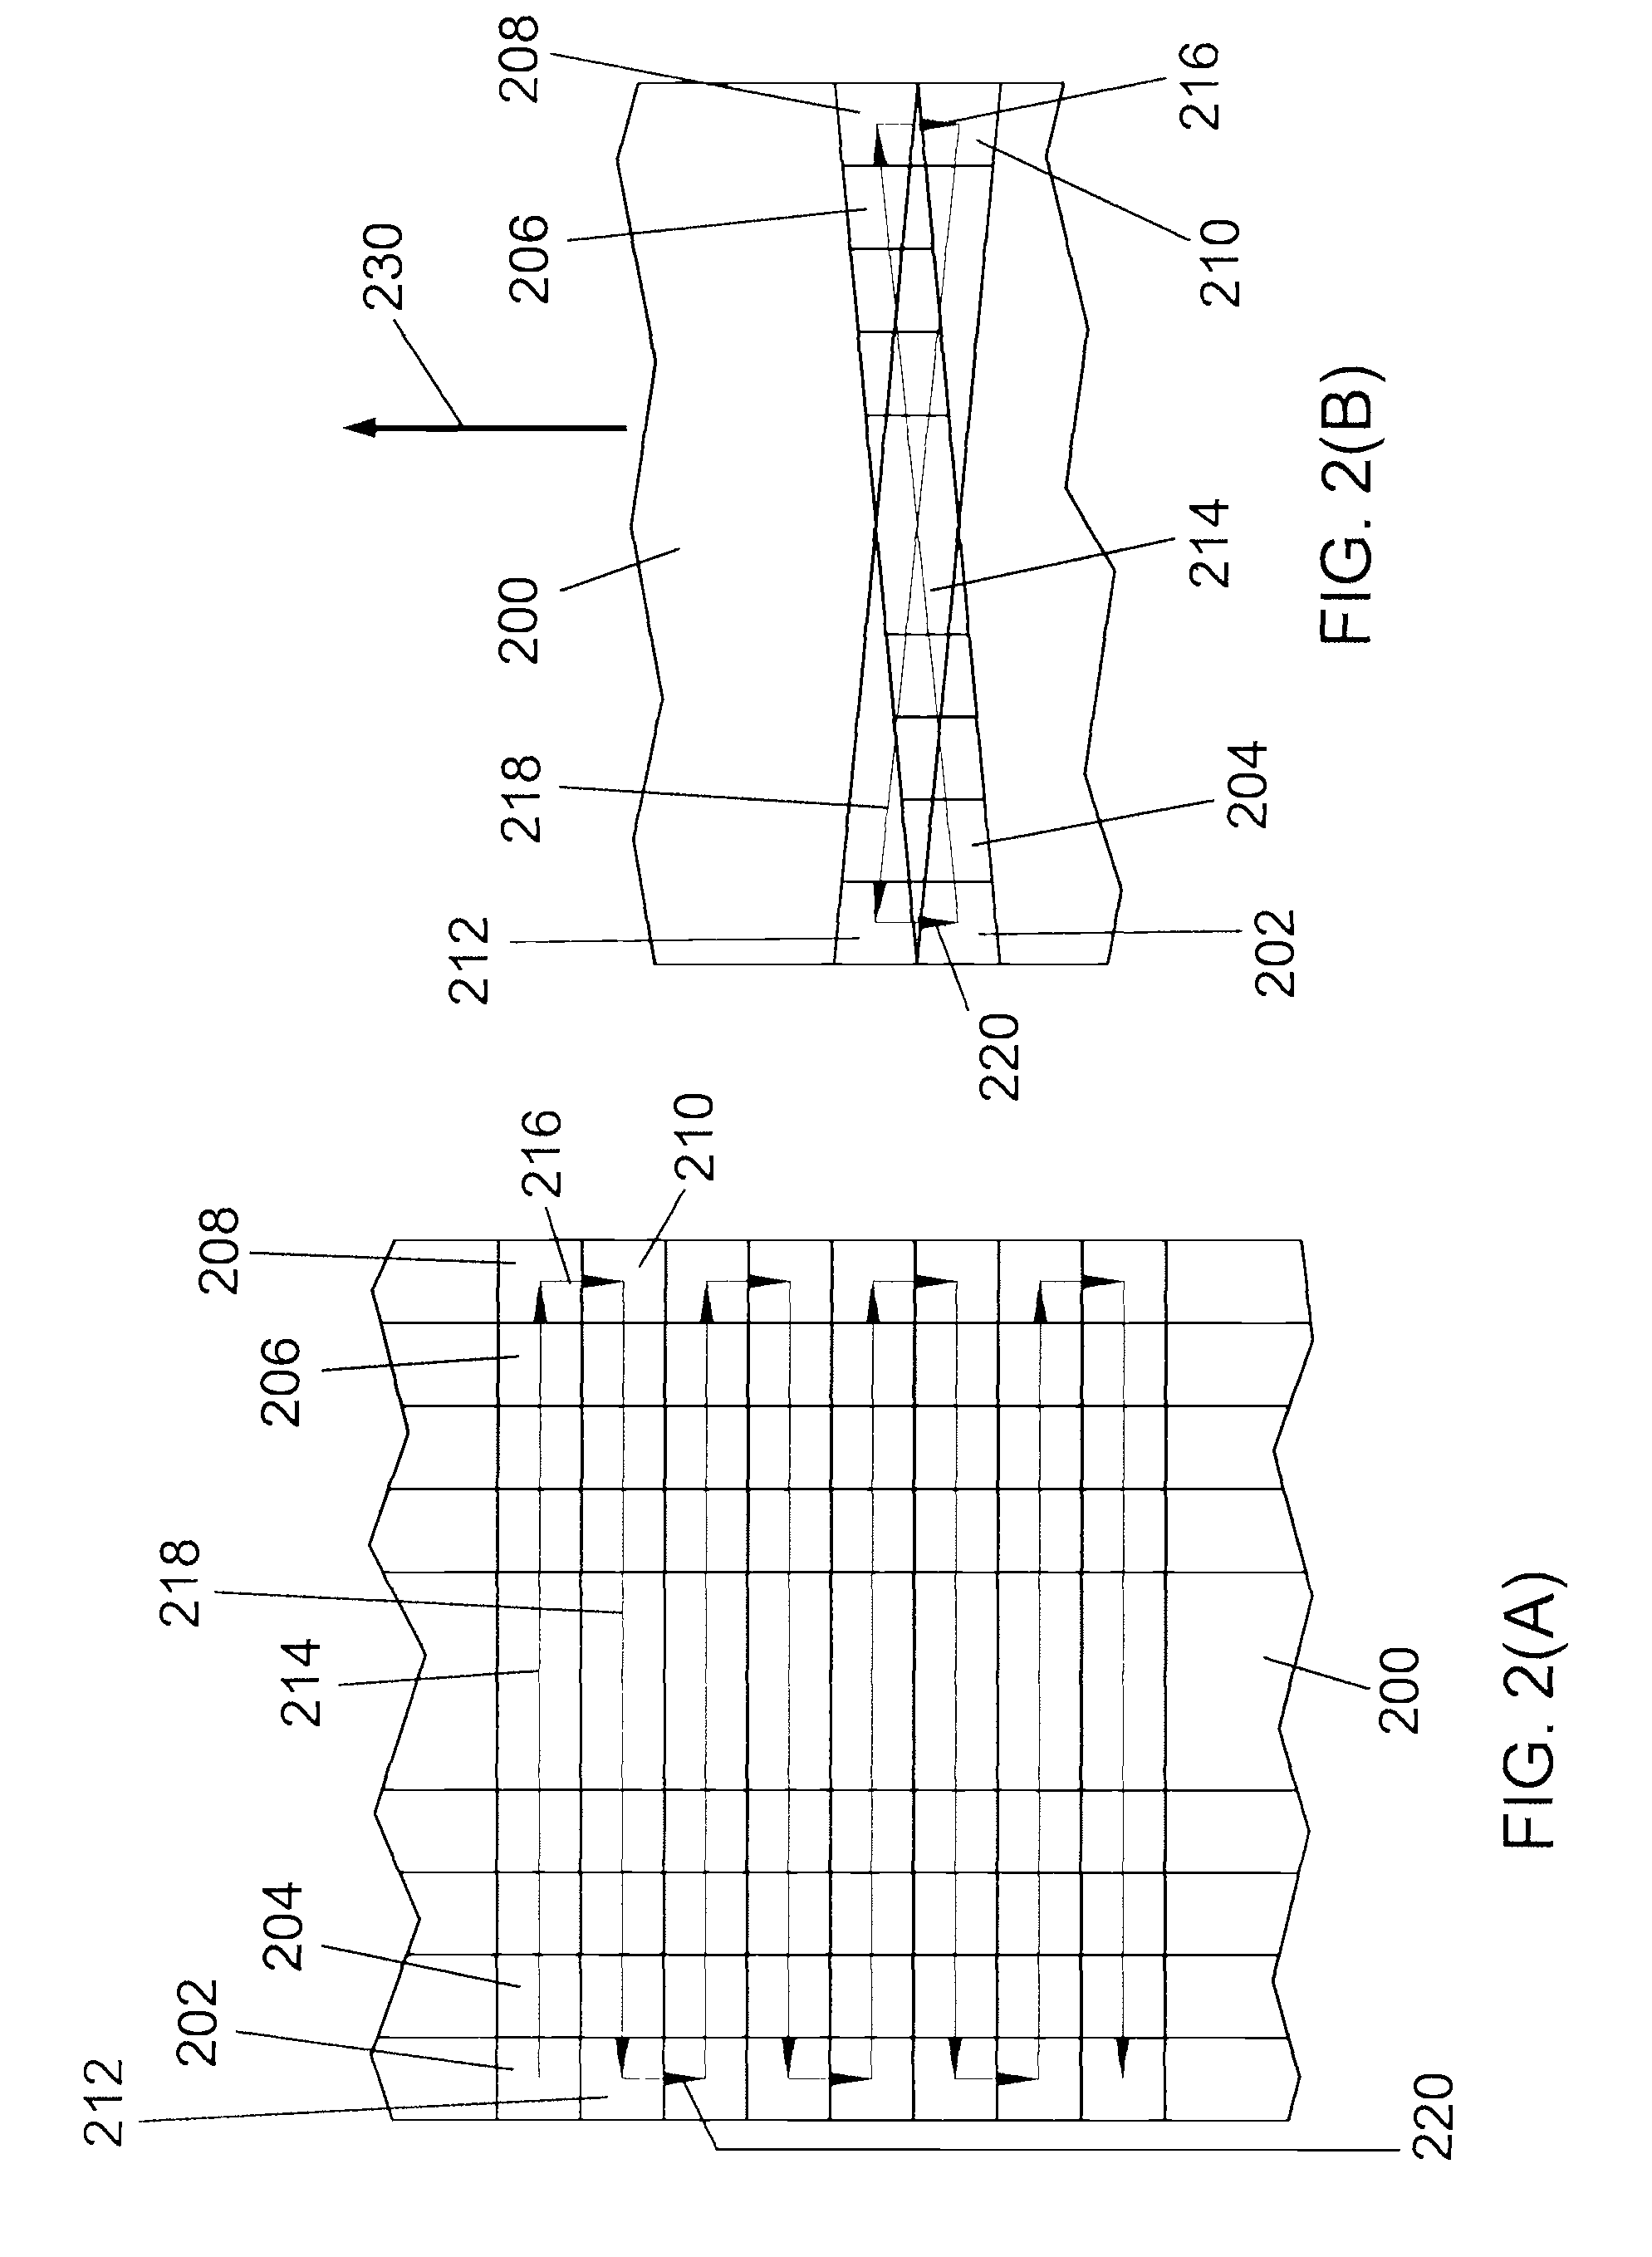 Charged particle beam deflection method with separate stage tracking and stage positional error signals